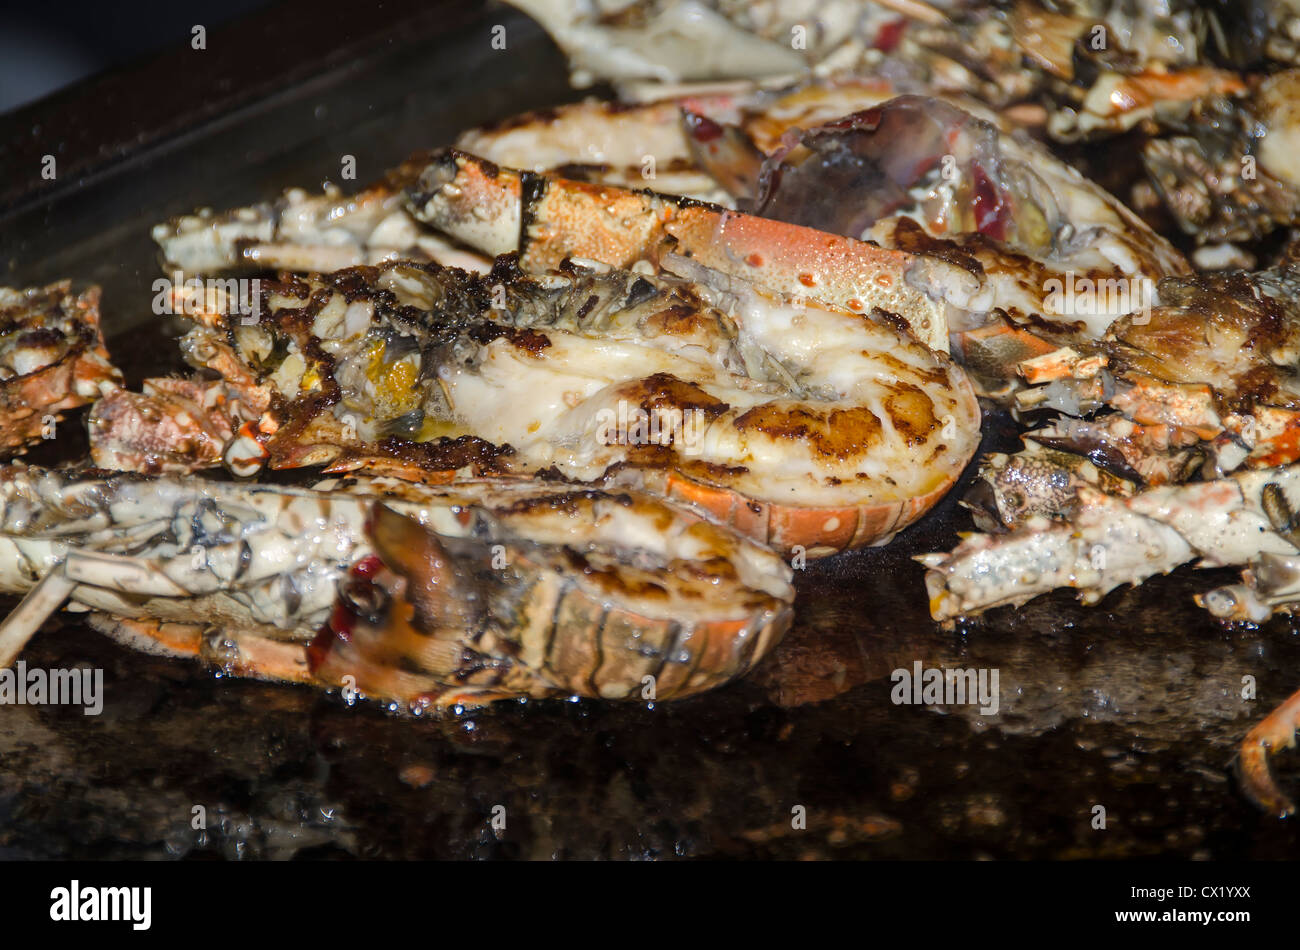 Caribbean lobster tails closeup grilling and steaming Stock Photo